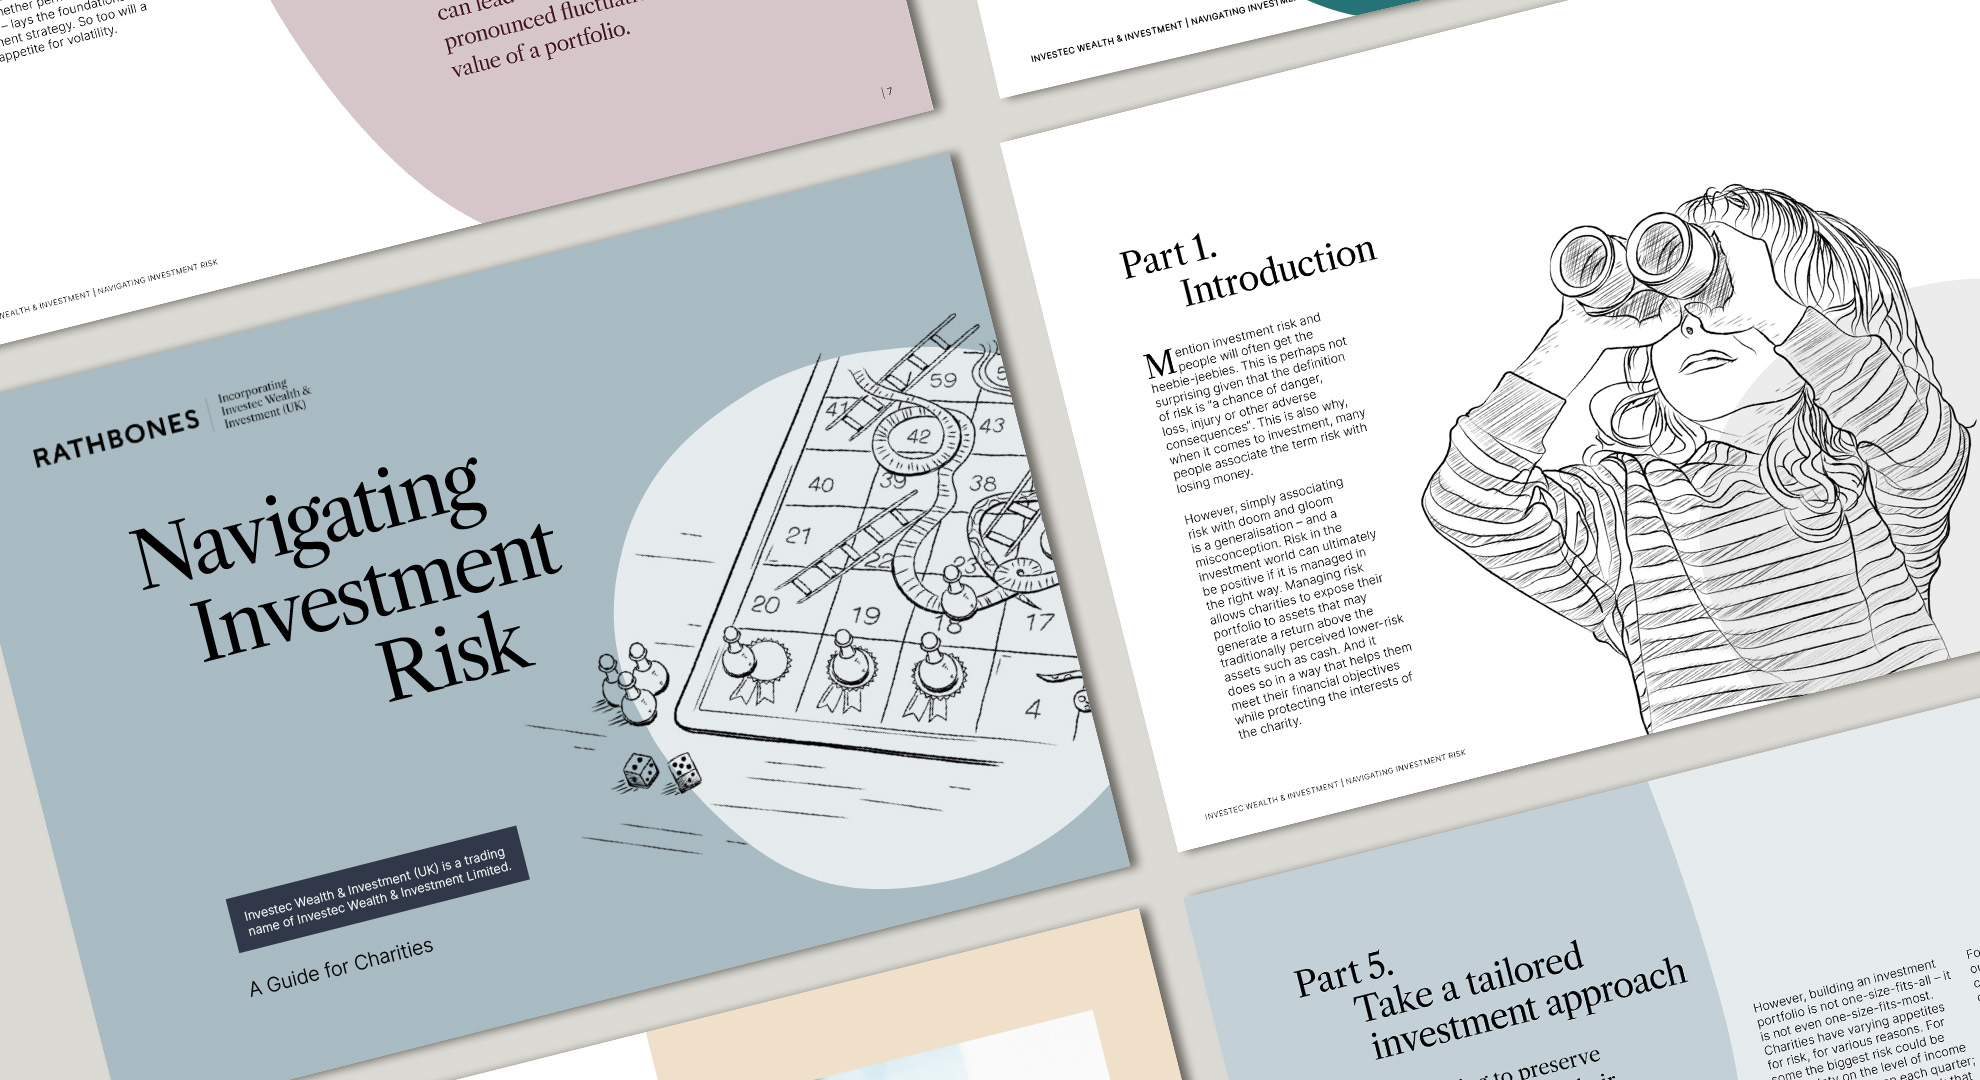 A view of the pages of the the Understanding Investment Risk guide for charities